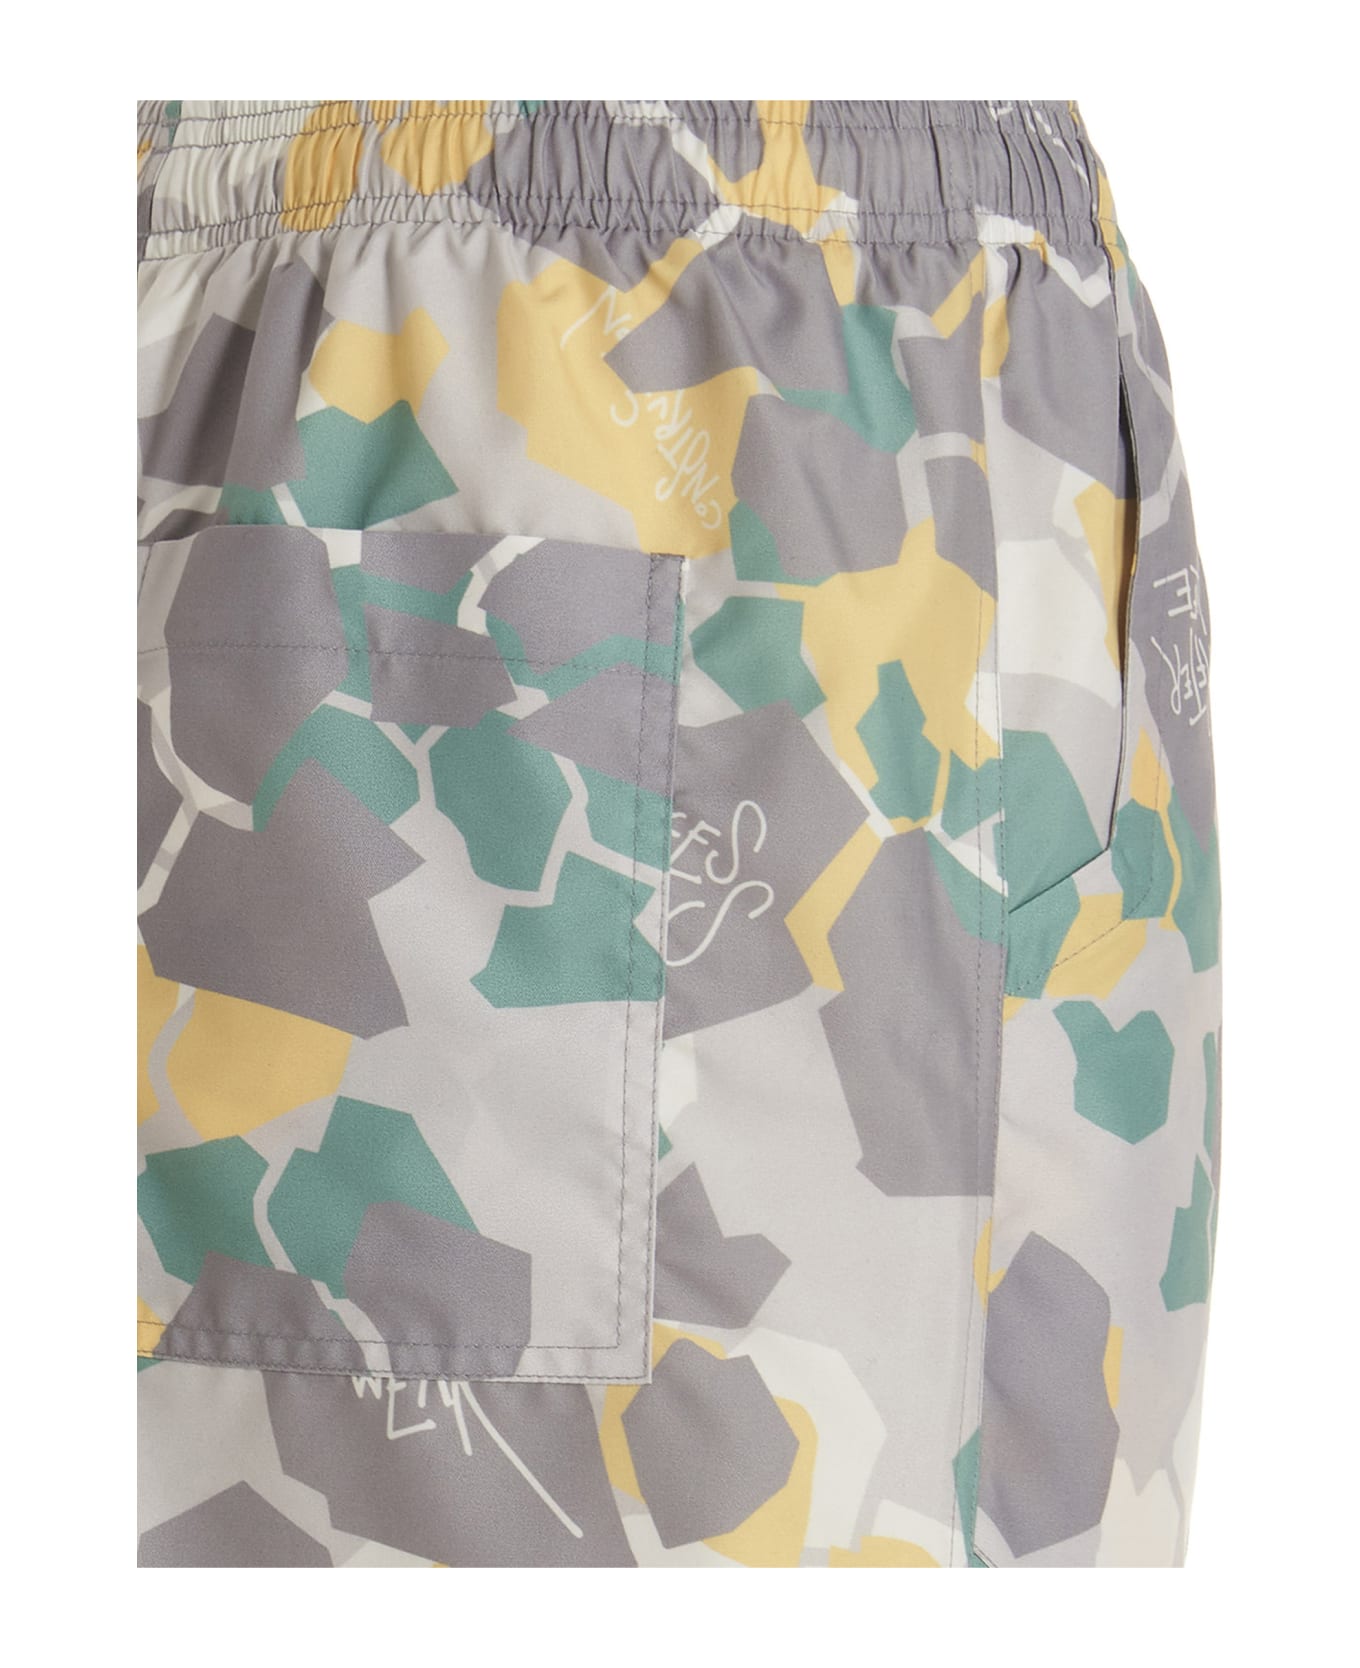 Objects Iv Life Printed Beach Shorts - Multicolor